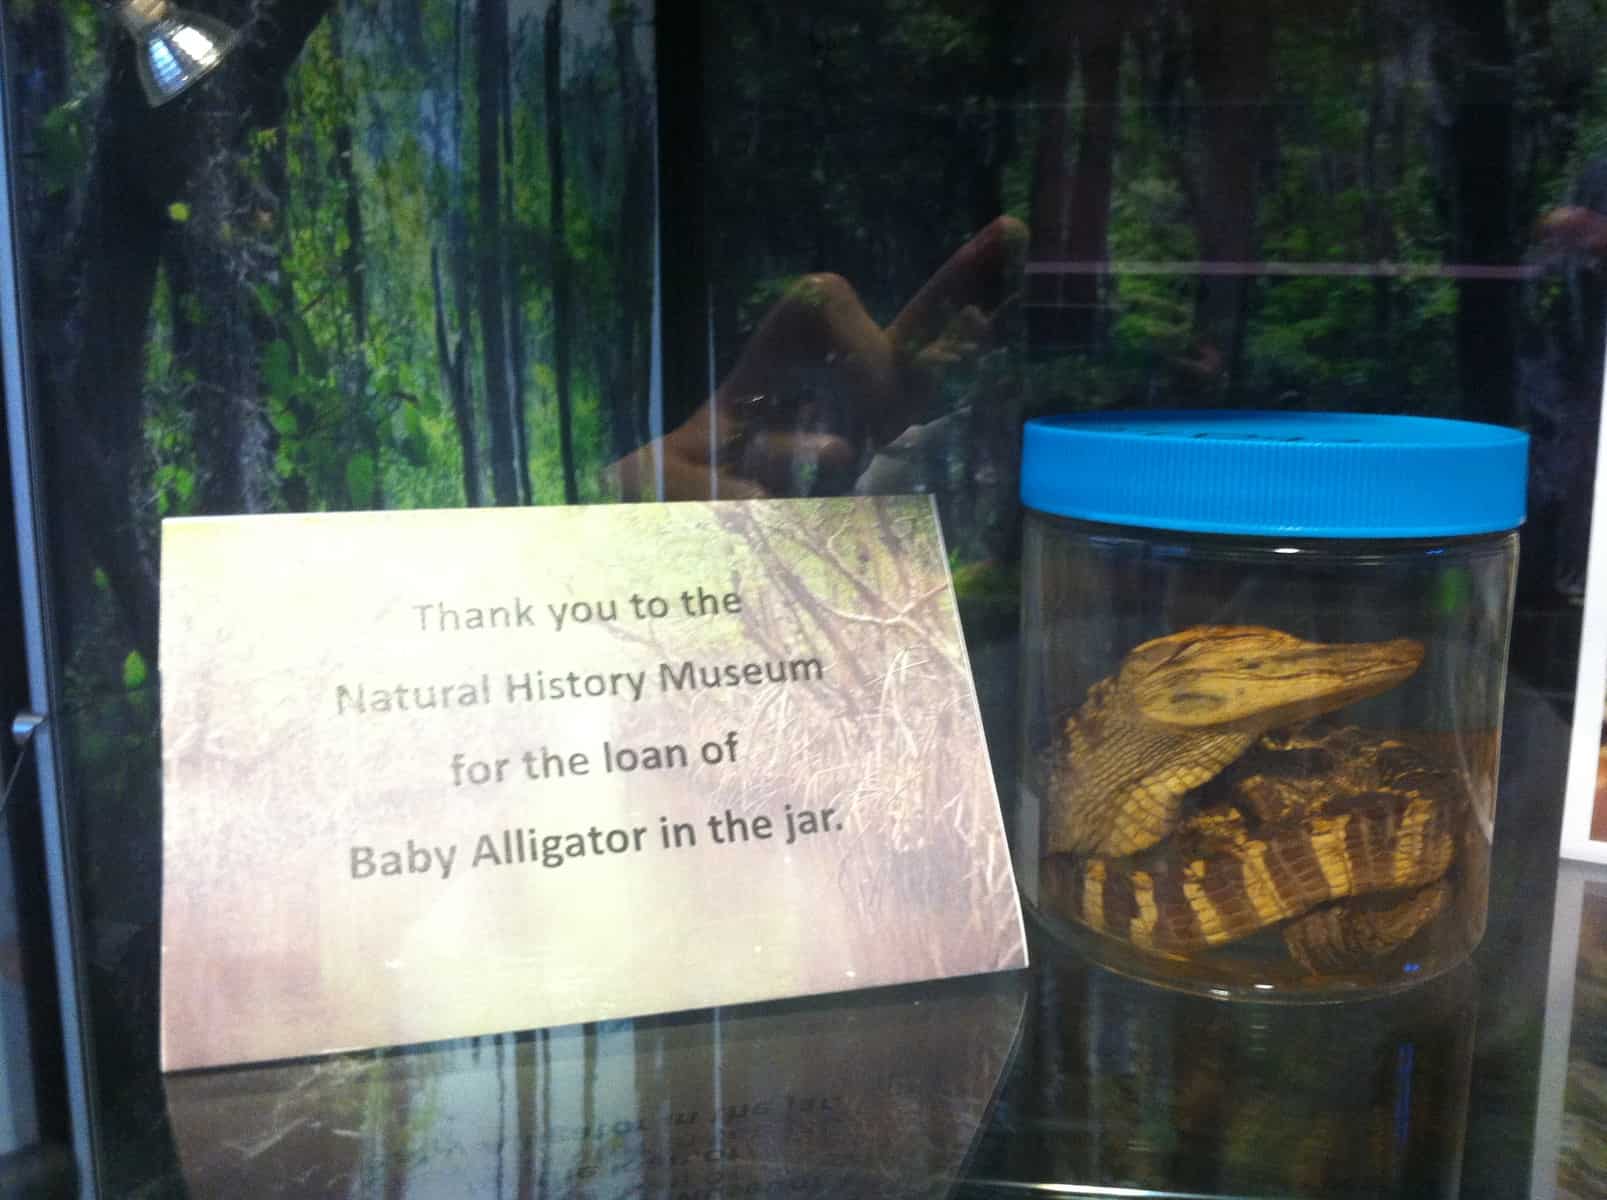 Baby alligator in a jar from the UI Museum of Natural History